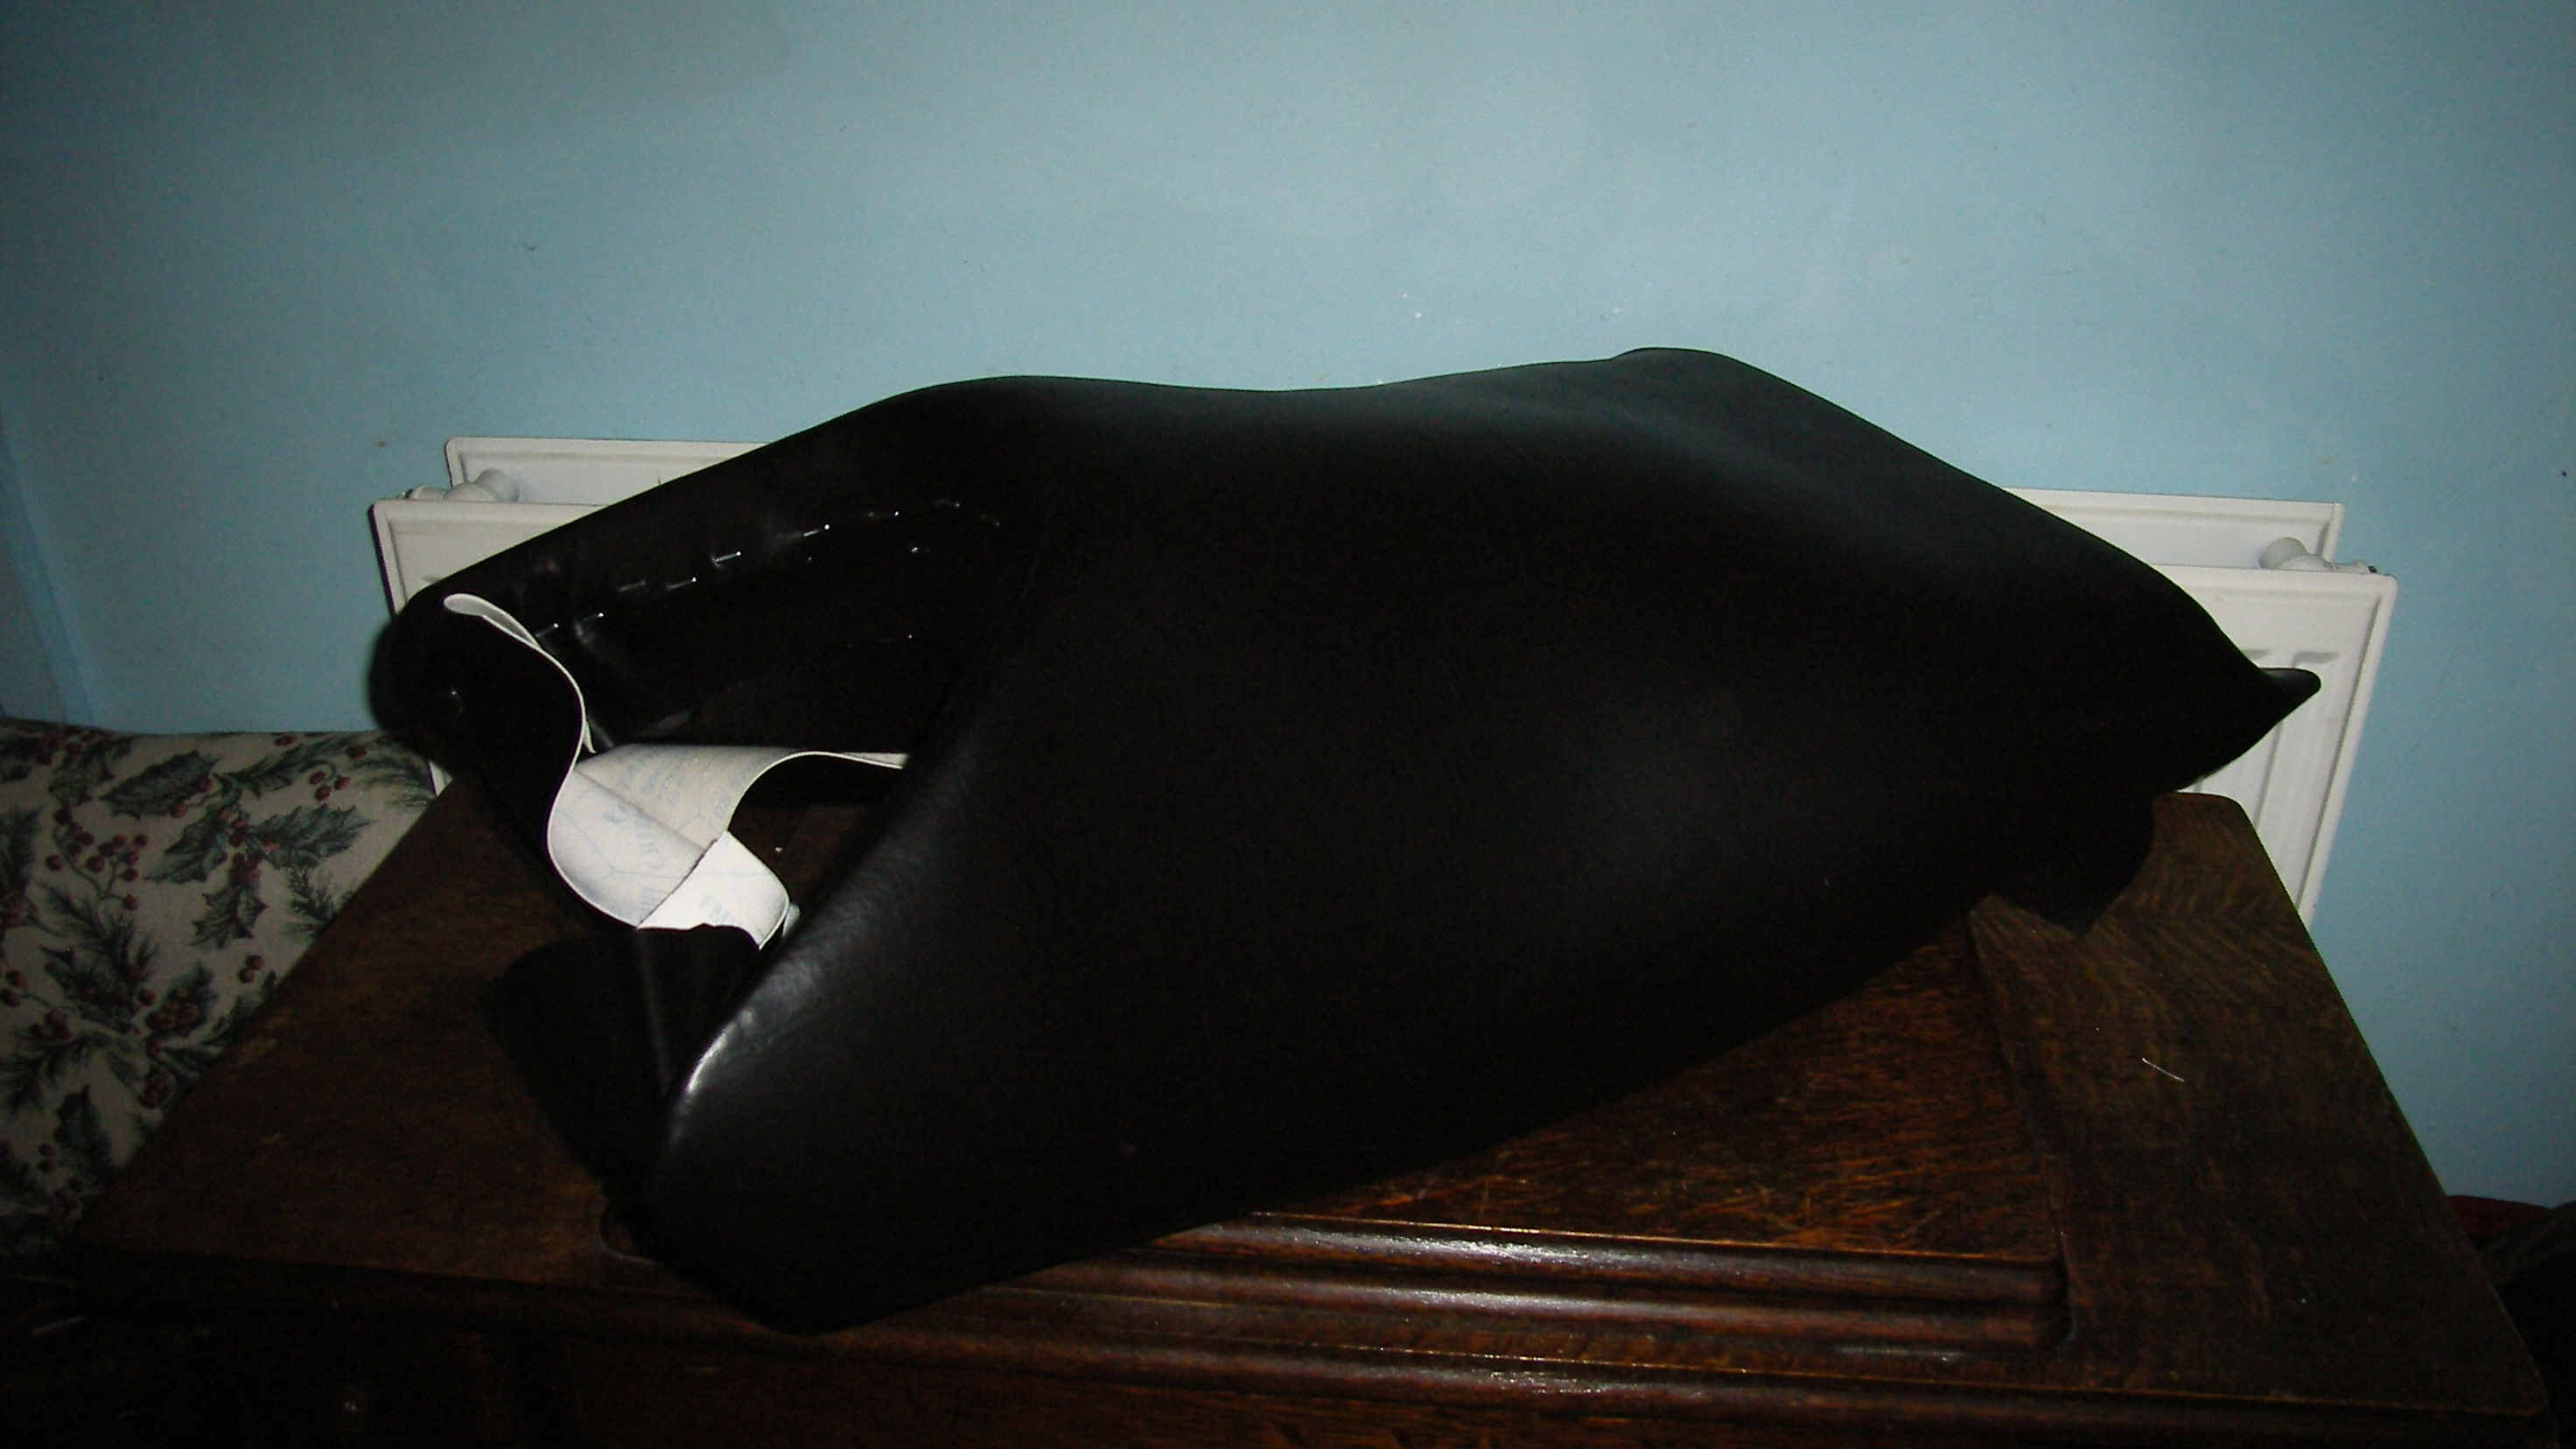 re-covering a BMW Motorcycle seat